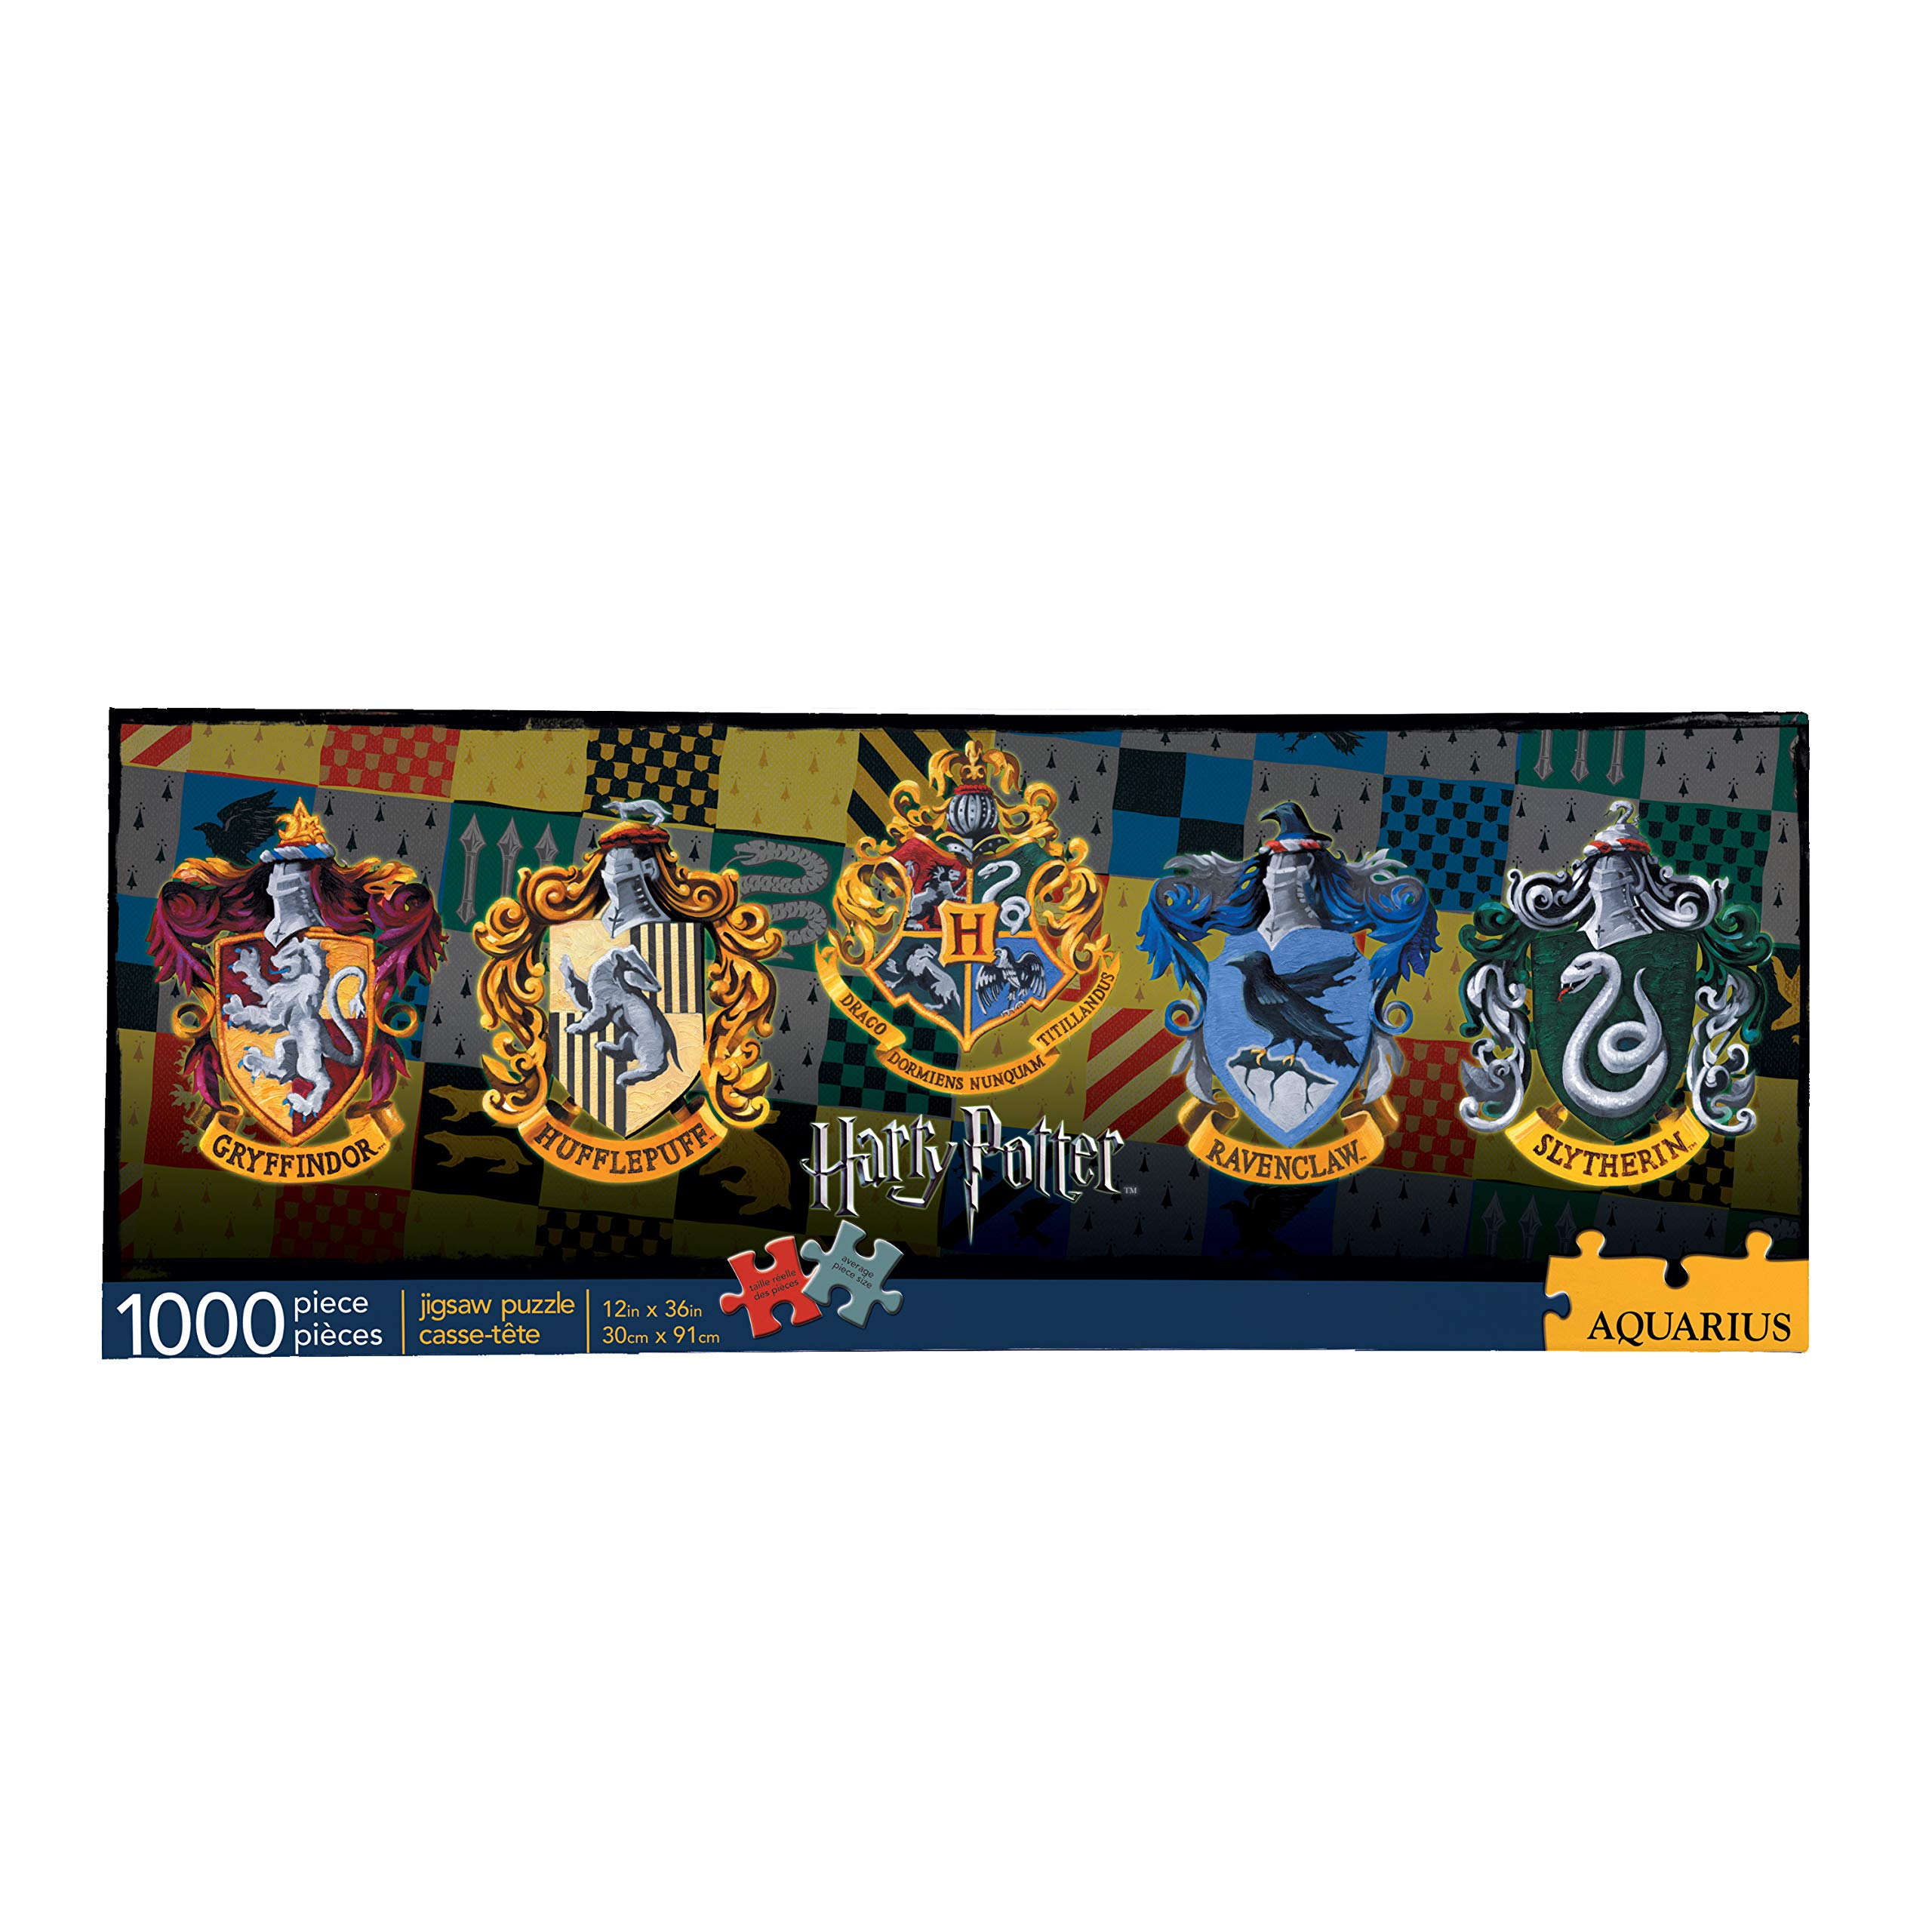 AQUARIUS Harry Potter Puzzle House Crests (1000 Piece Jigsaw Puzzle) - Officially Licensed Harry Potter Merchandise & Collectibles - Glare Free - Precision Fit - 13x36in